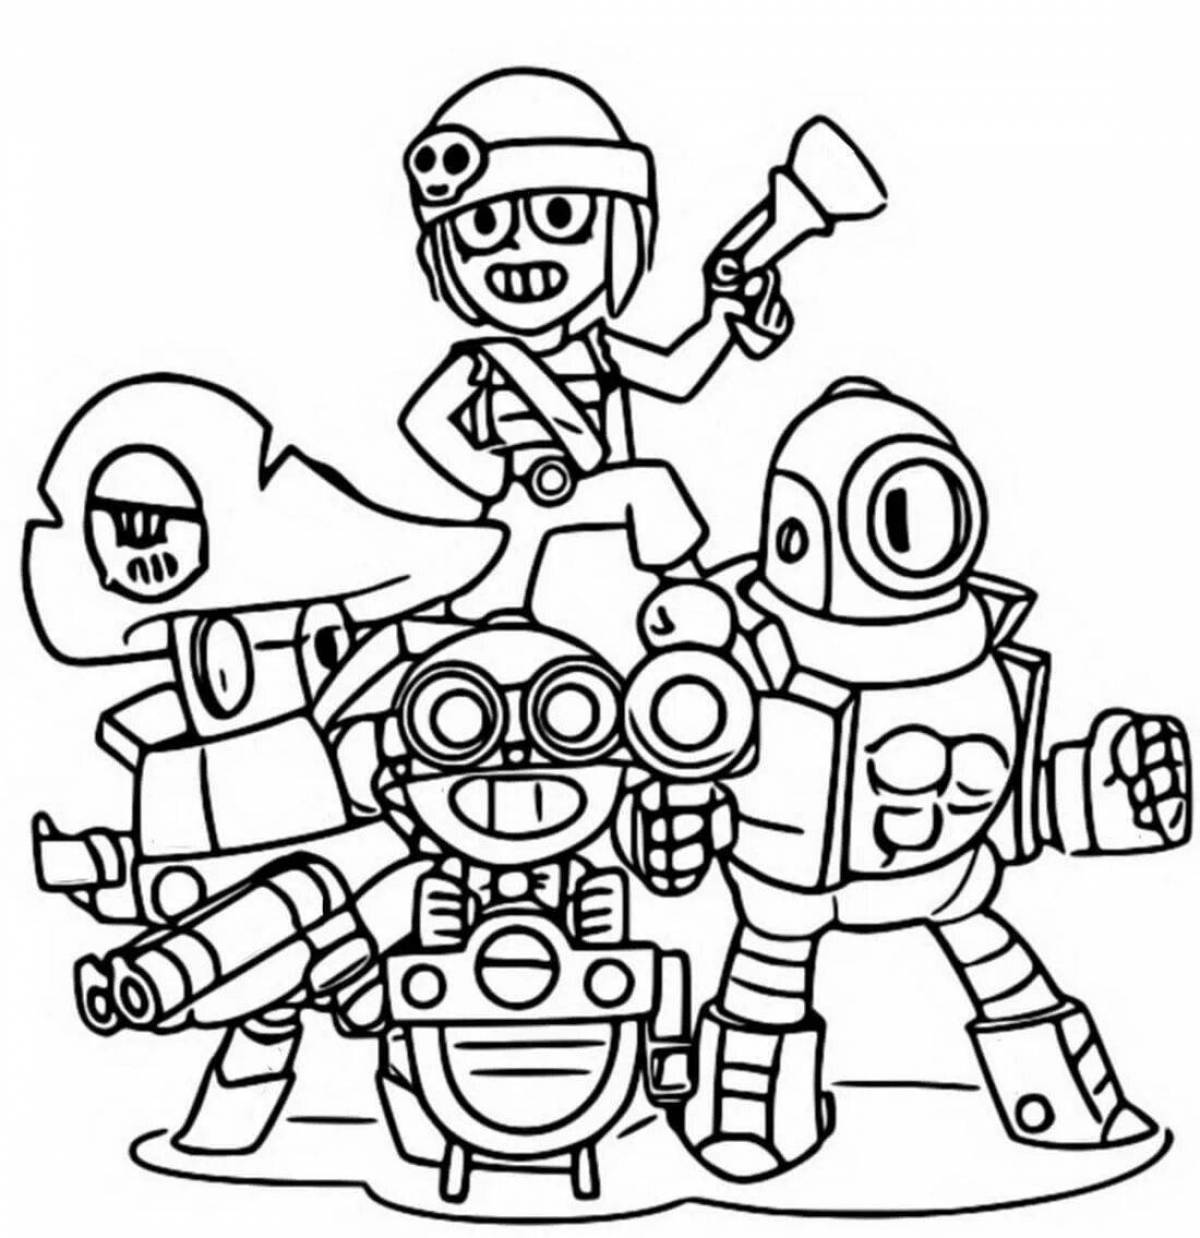 Colorful cuboom coloring page